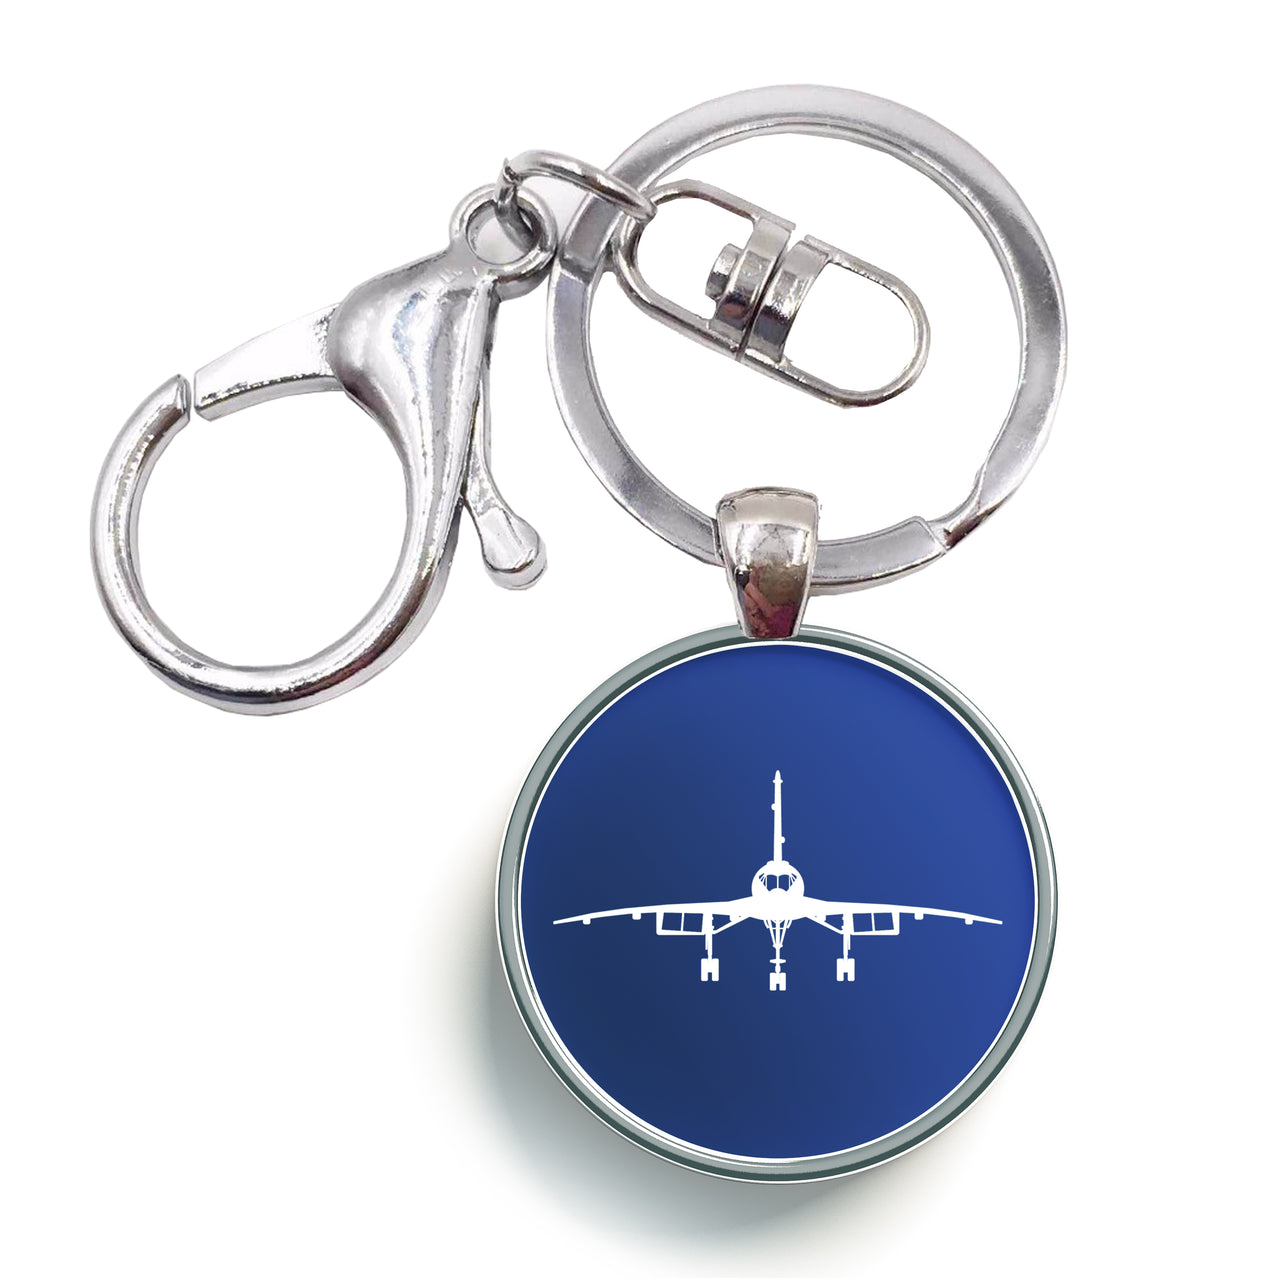 Concorde Silhouette Designed Circle Key Chains